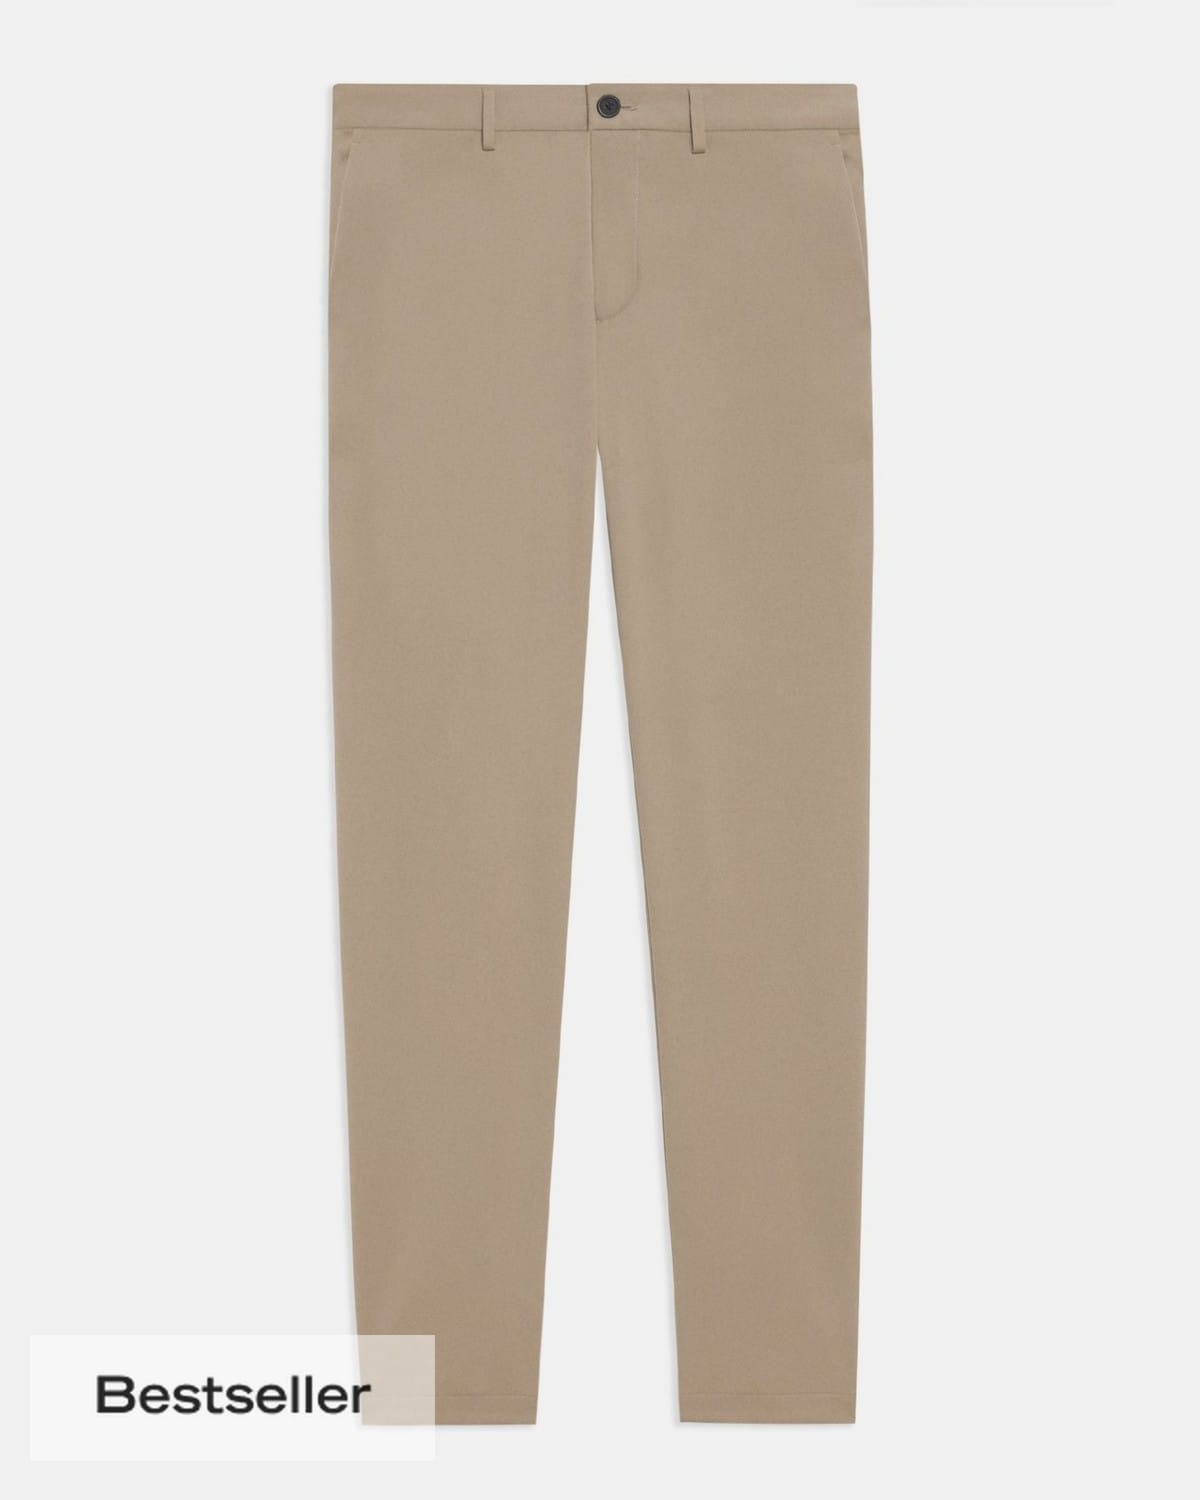 Zaine Pant in Neoteric